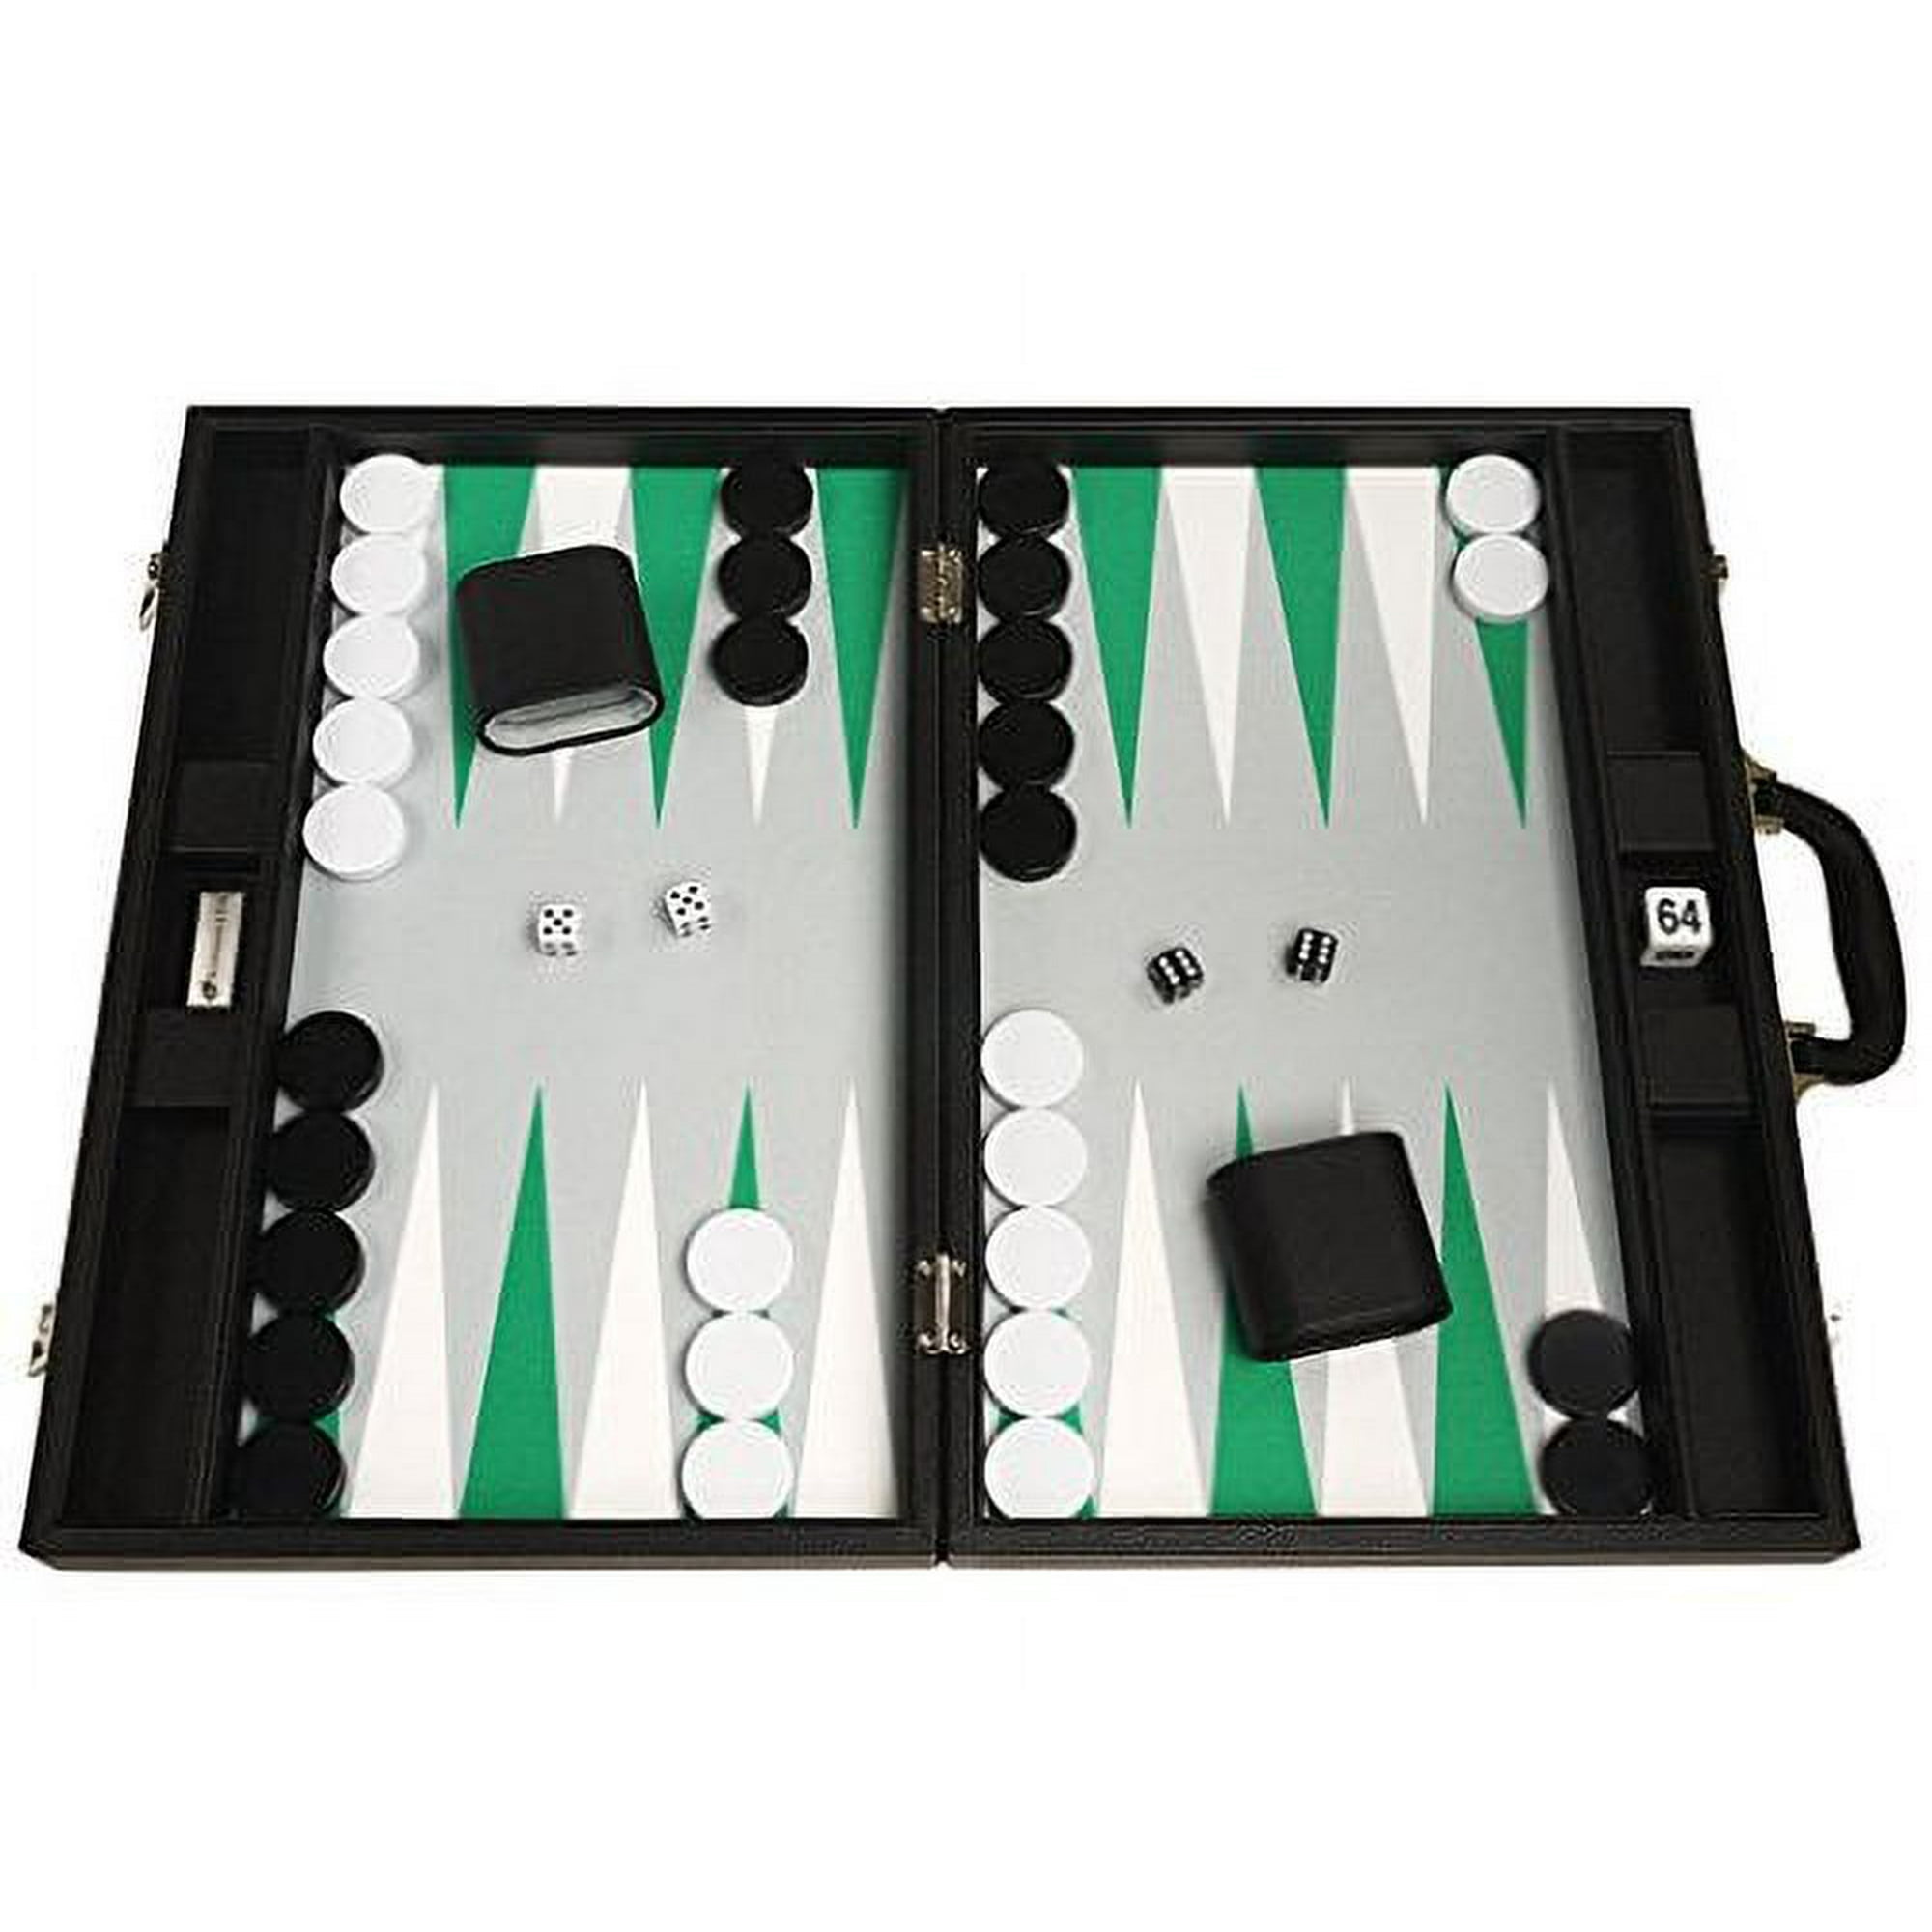 Silverman & Co. 19-inch Premium Backgammon Set - Large Size - Black Board,  White and Green Points